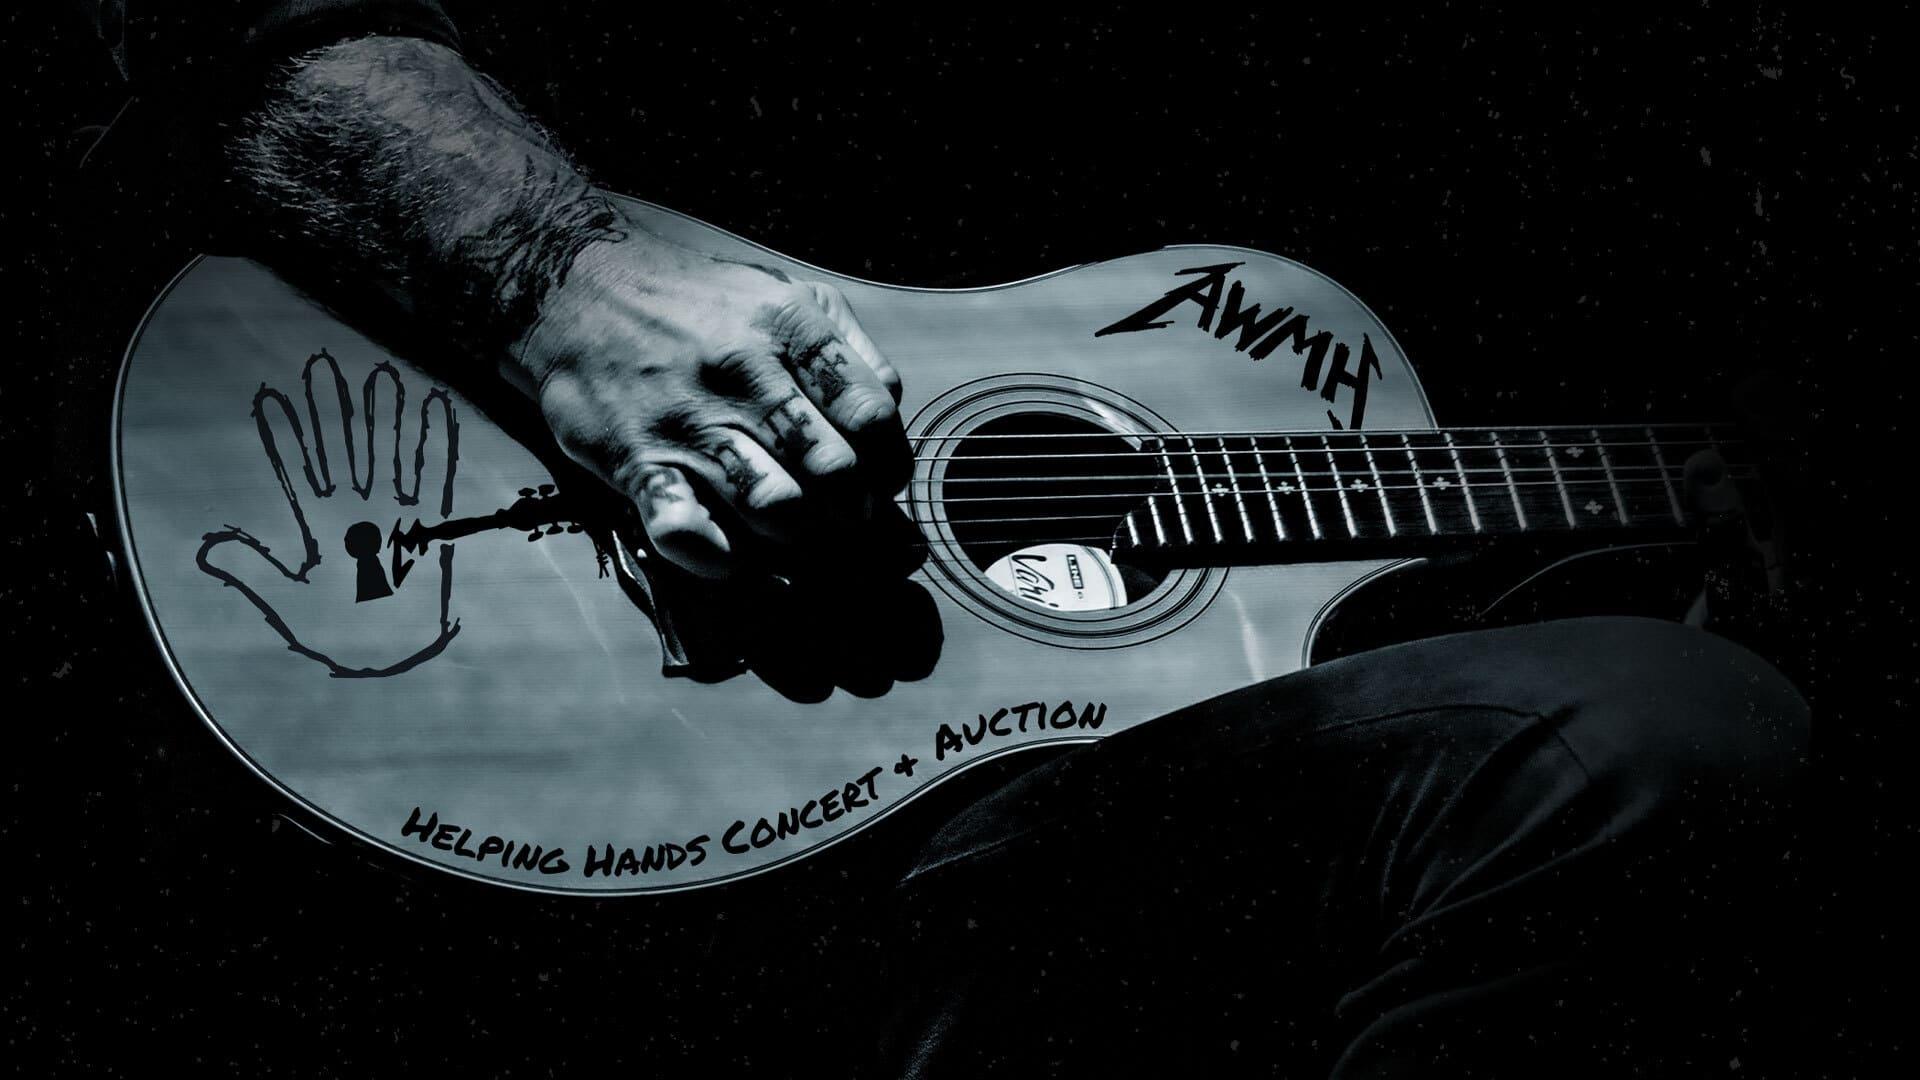 Metallica Helping Hands Concert & Auction: Live & Acoustic From HQ backdrop